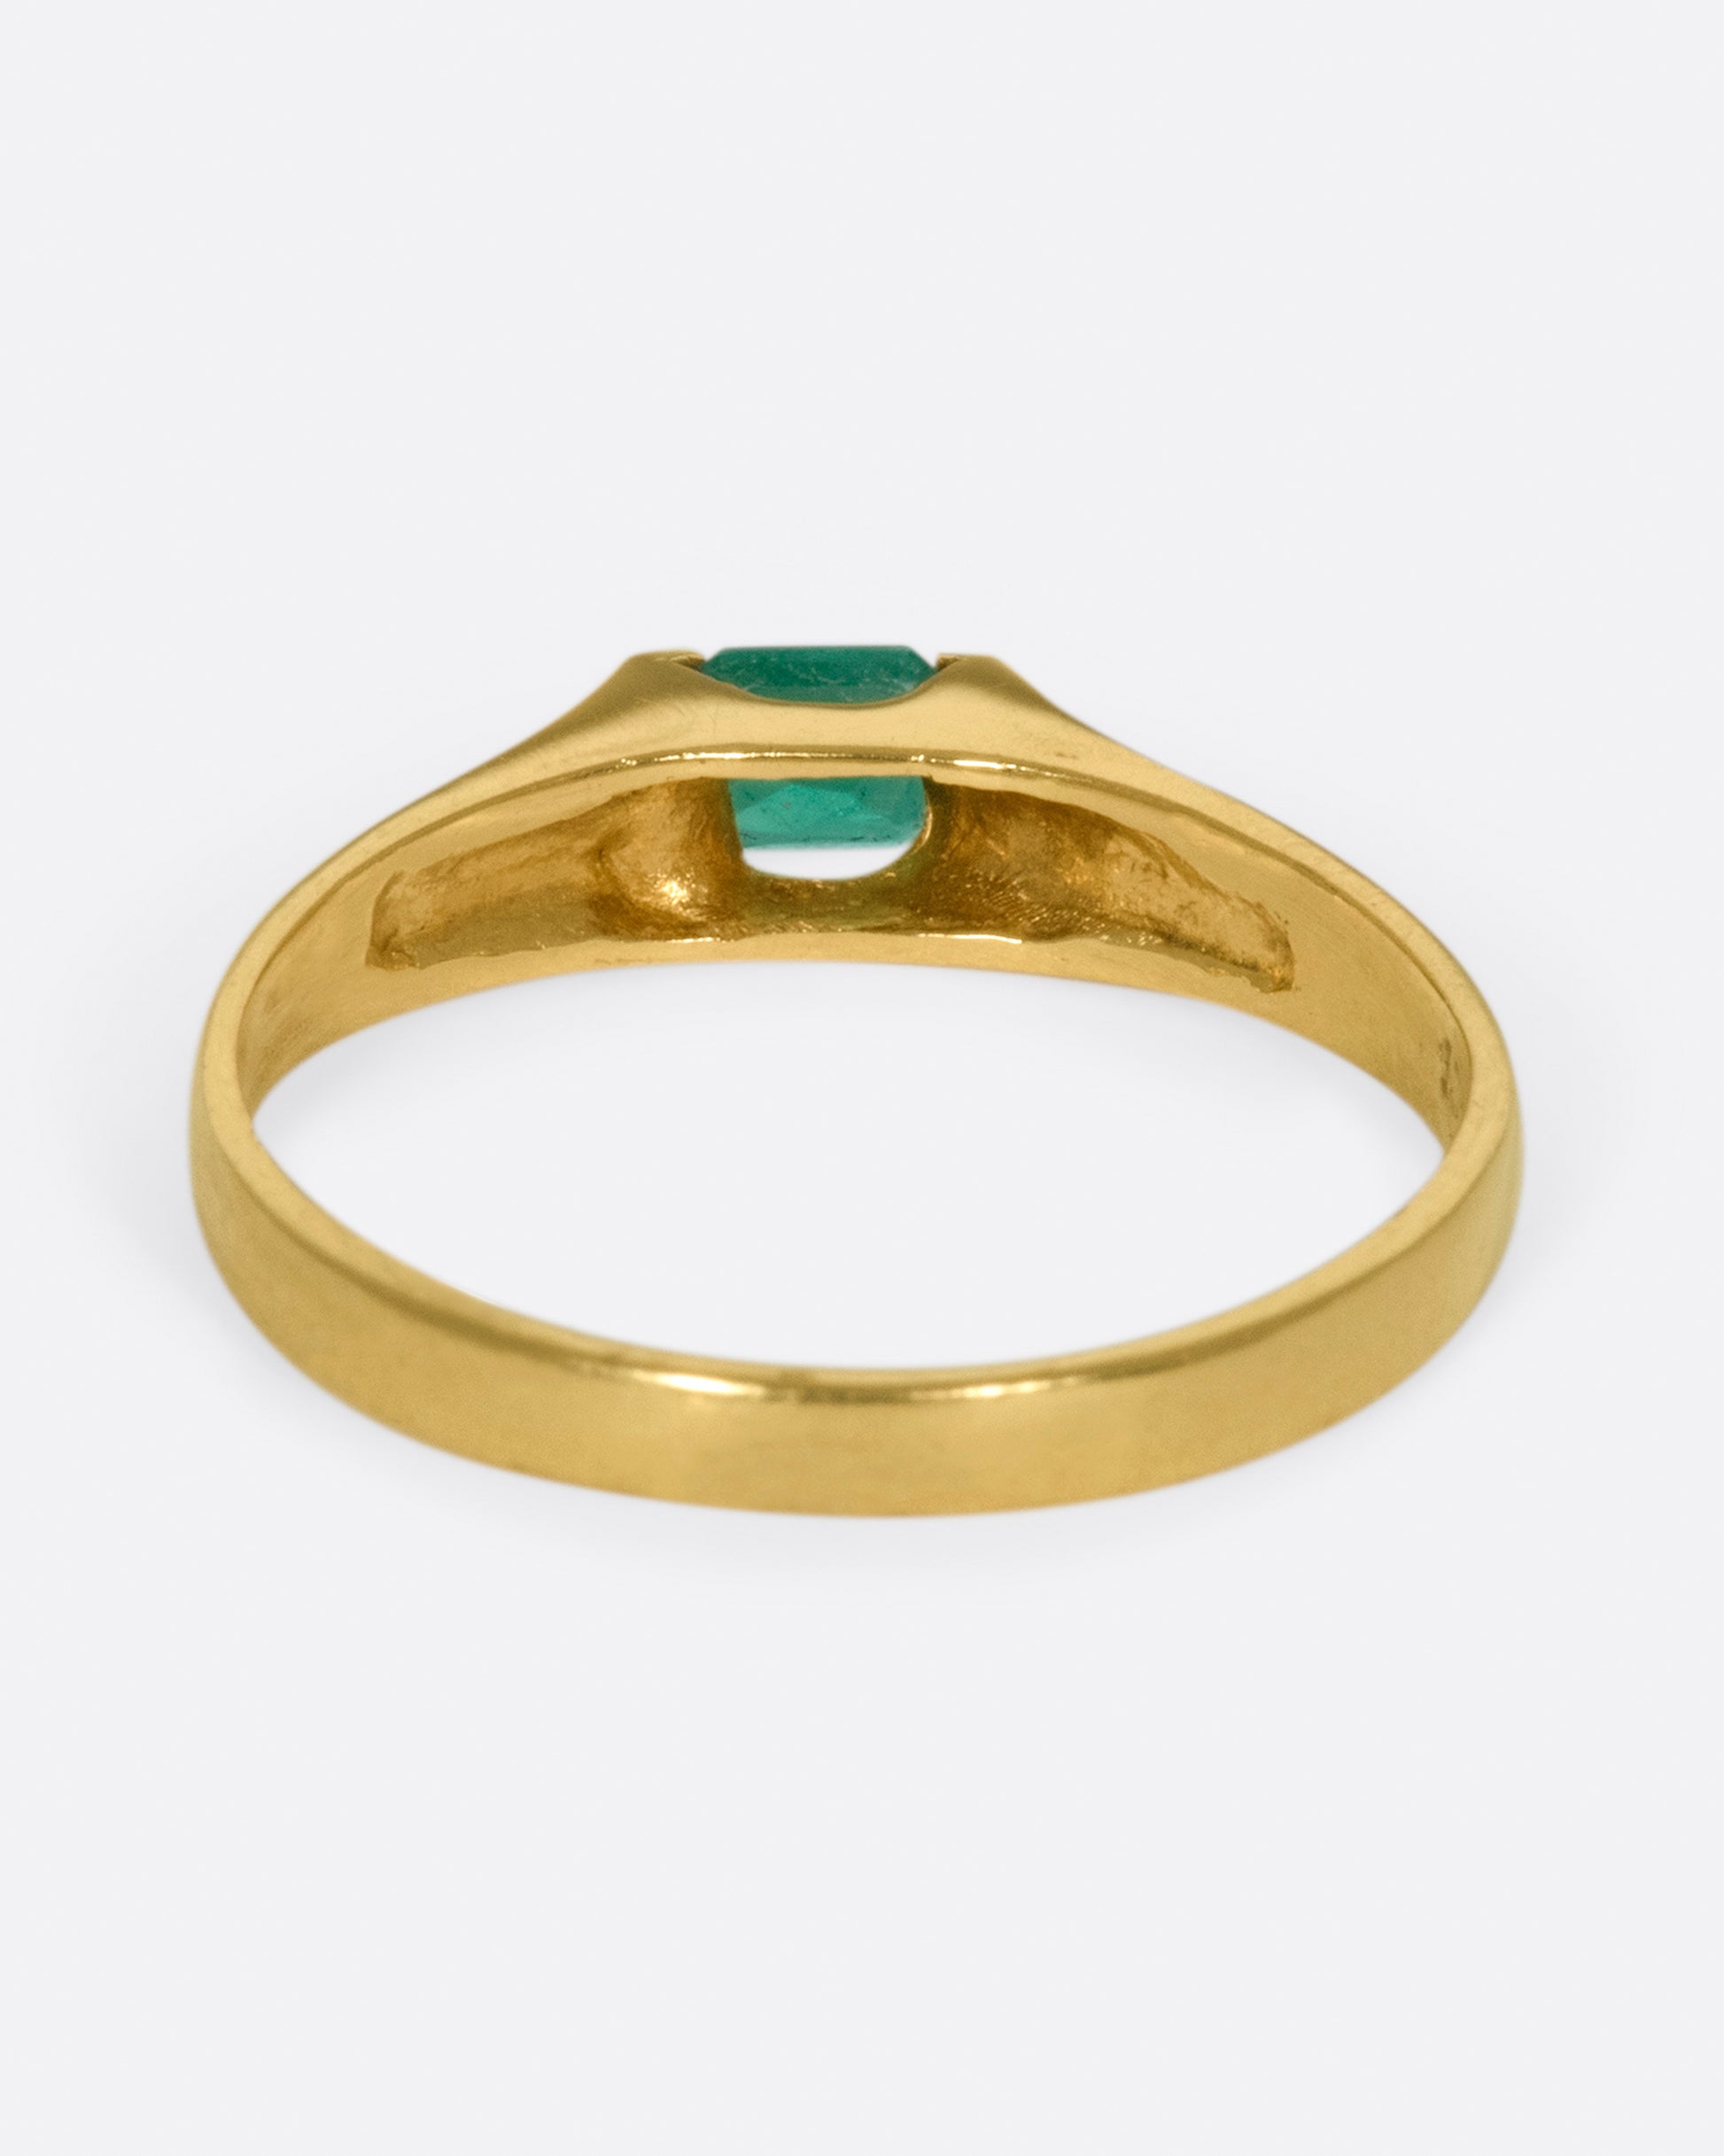 A gold solitaire ring with a tension set emerald cut emerald.